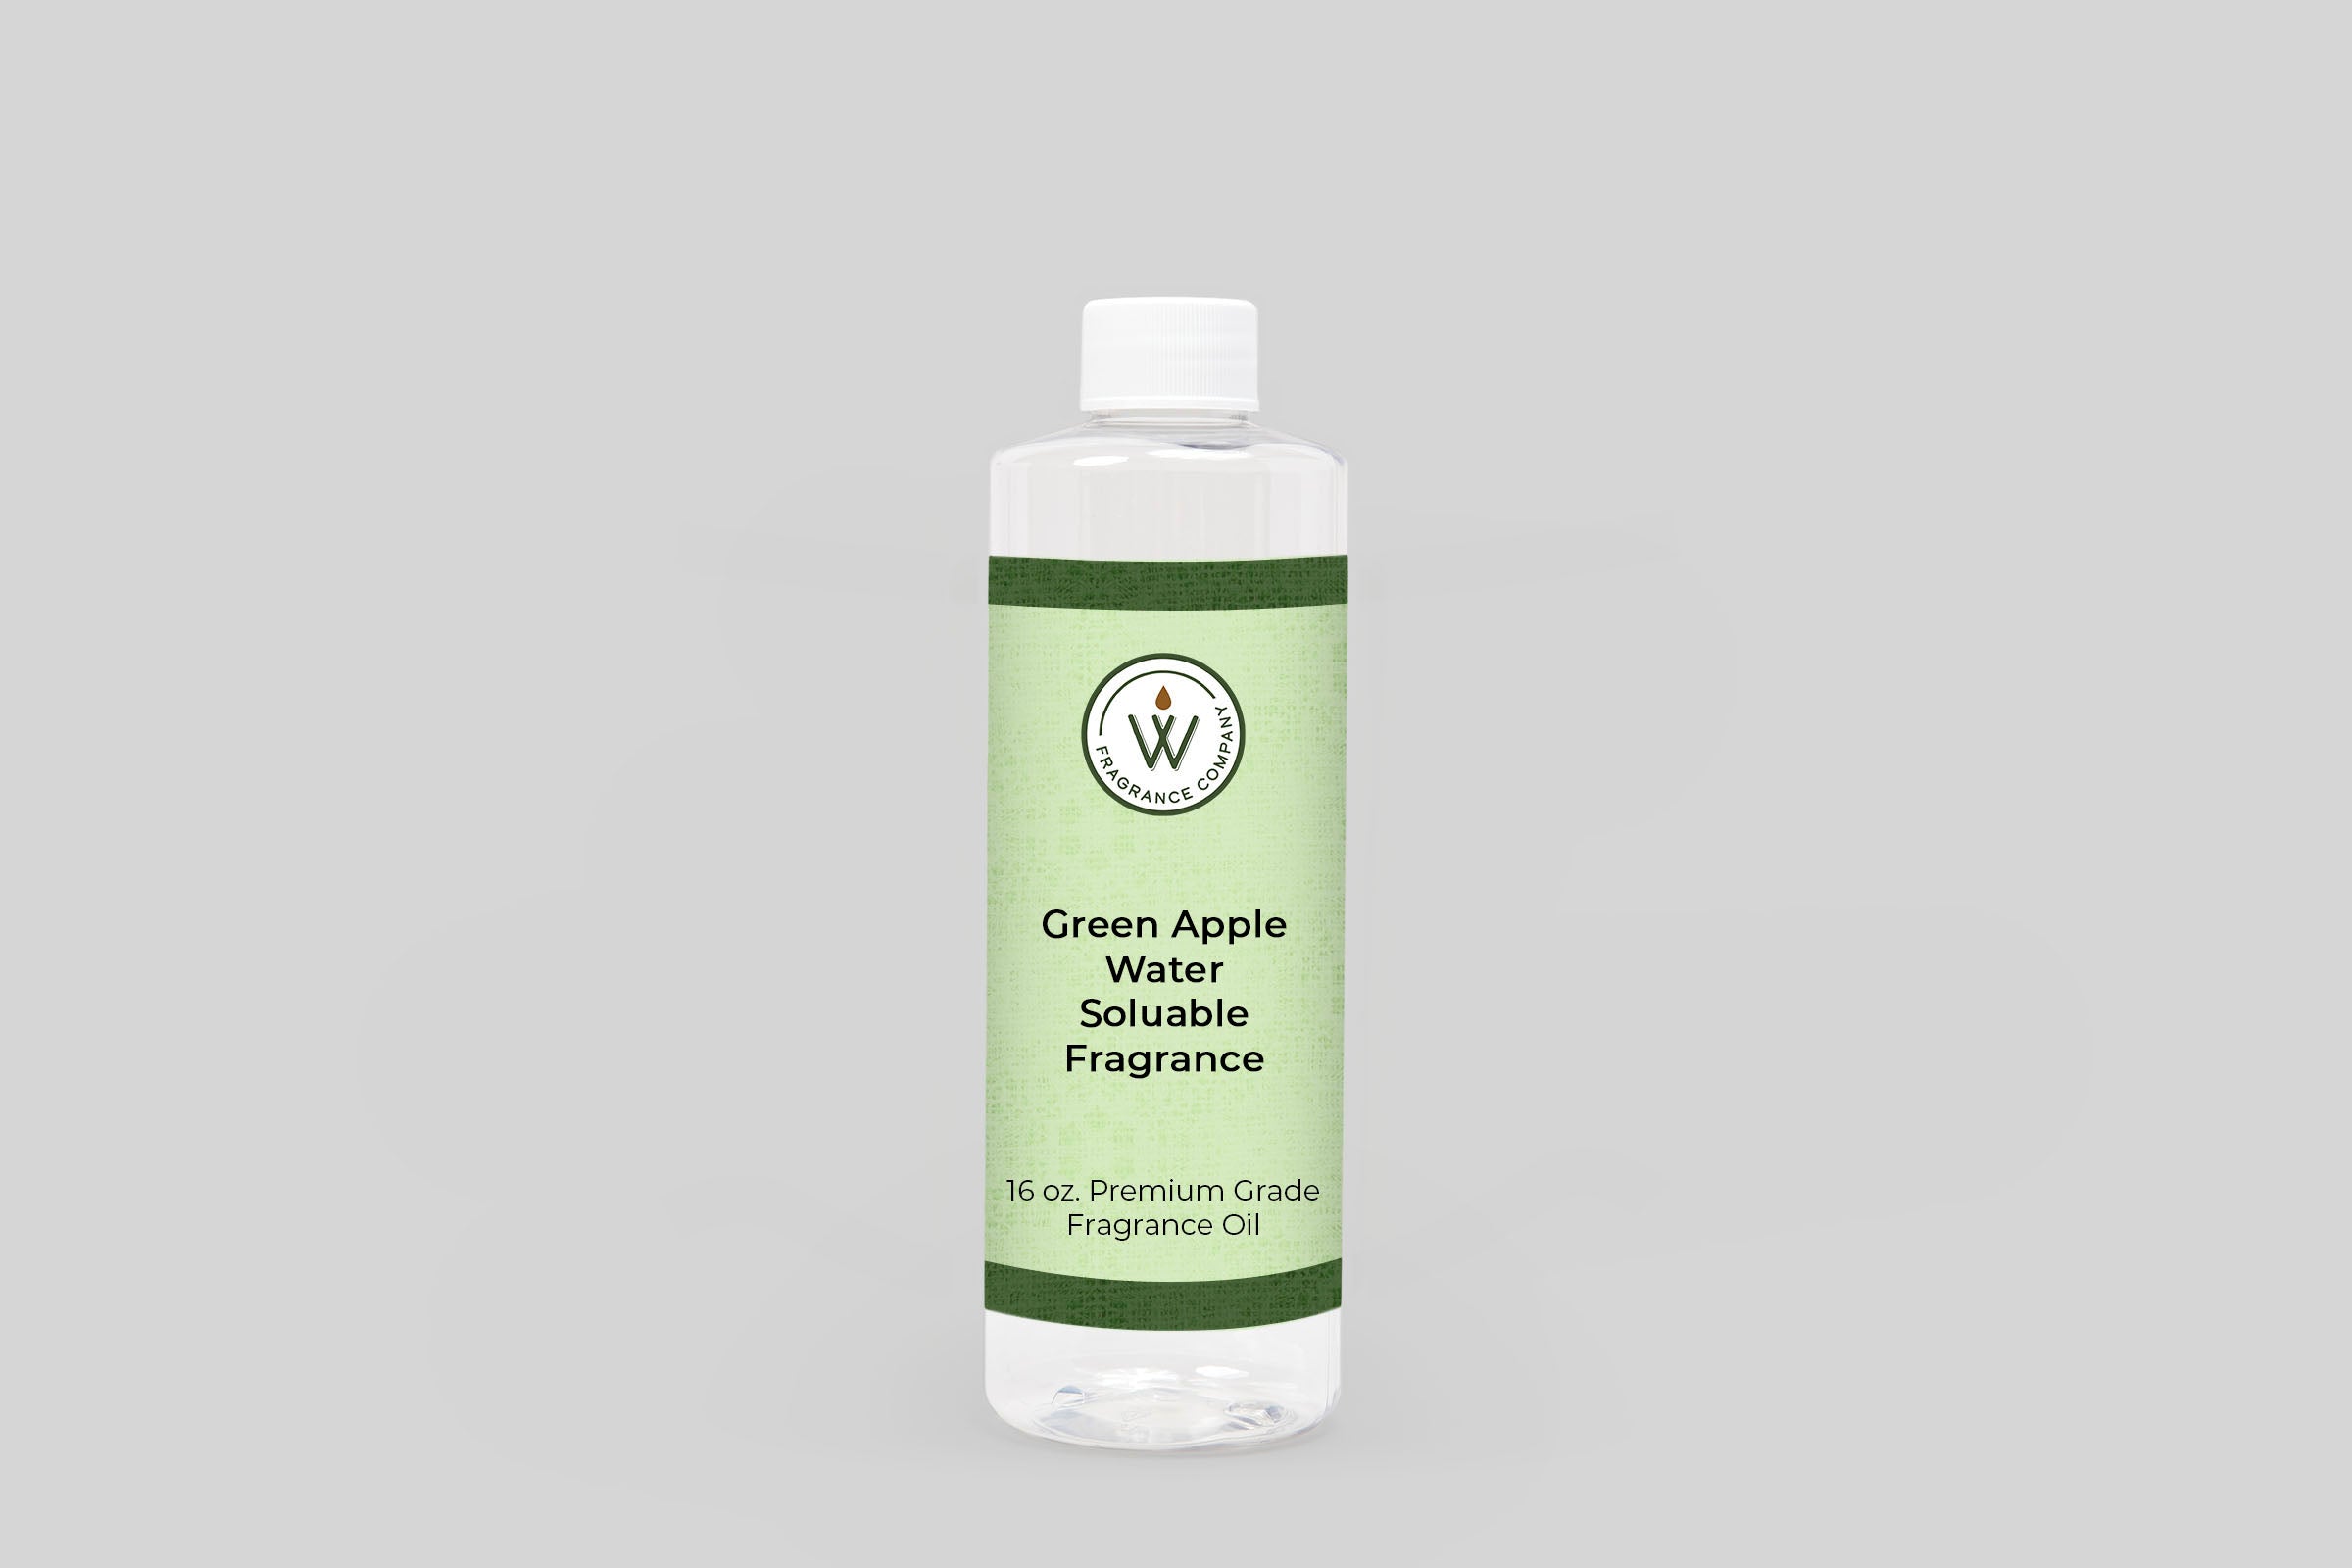 Green Apple Water Soluble Fragrance